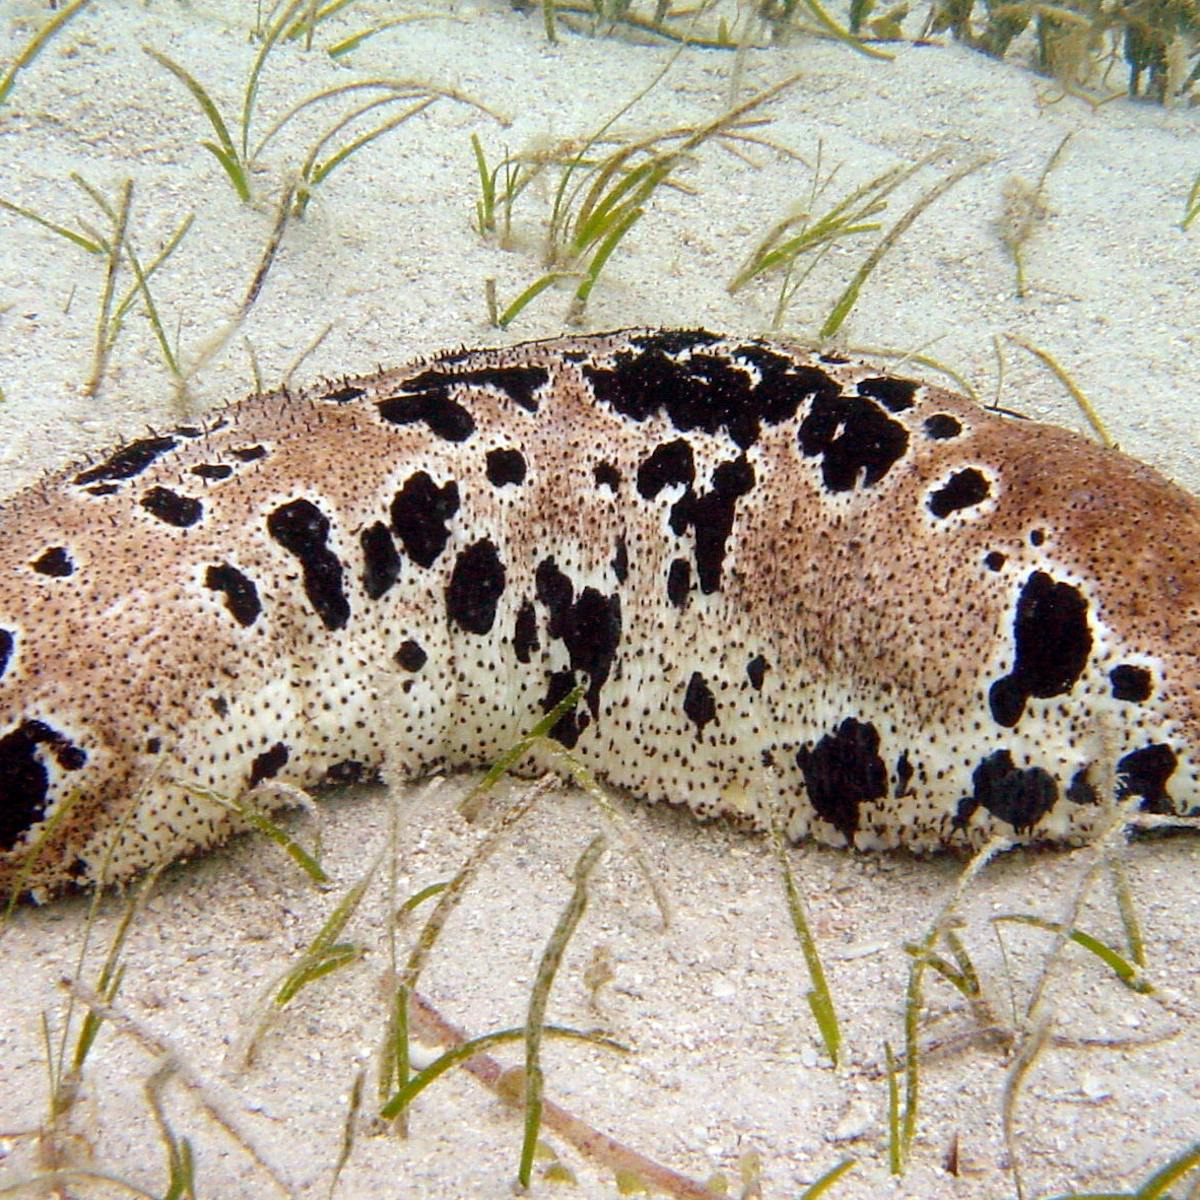 Sea cucumbers are so popular in Asia they face extinction